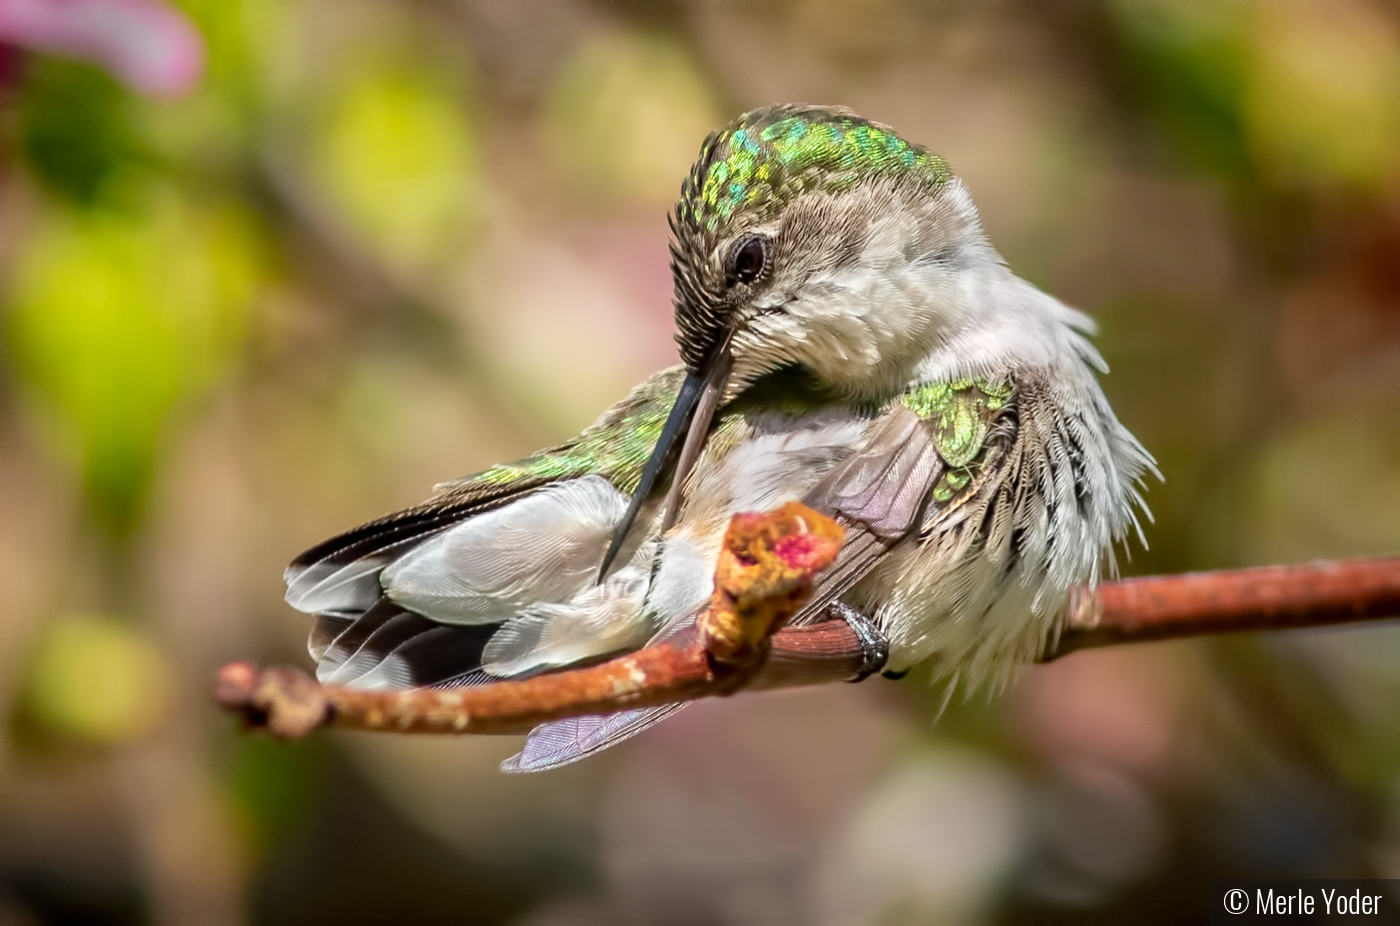 Preening her feathers by Merle Yoder